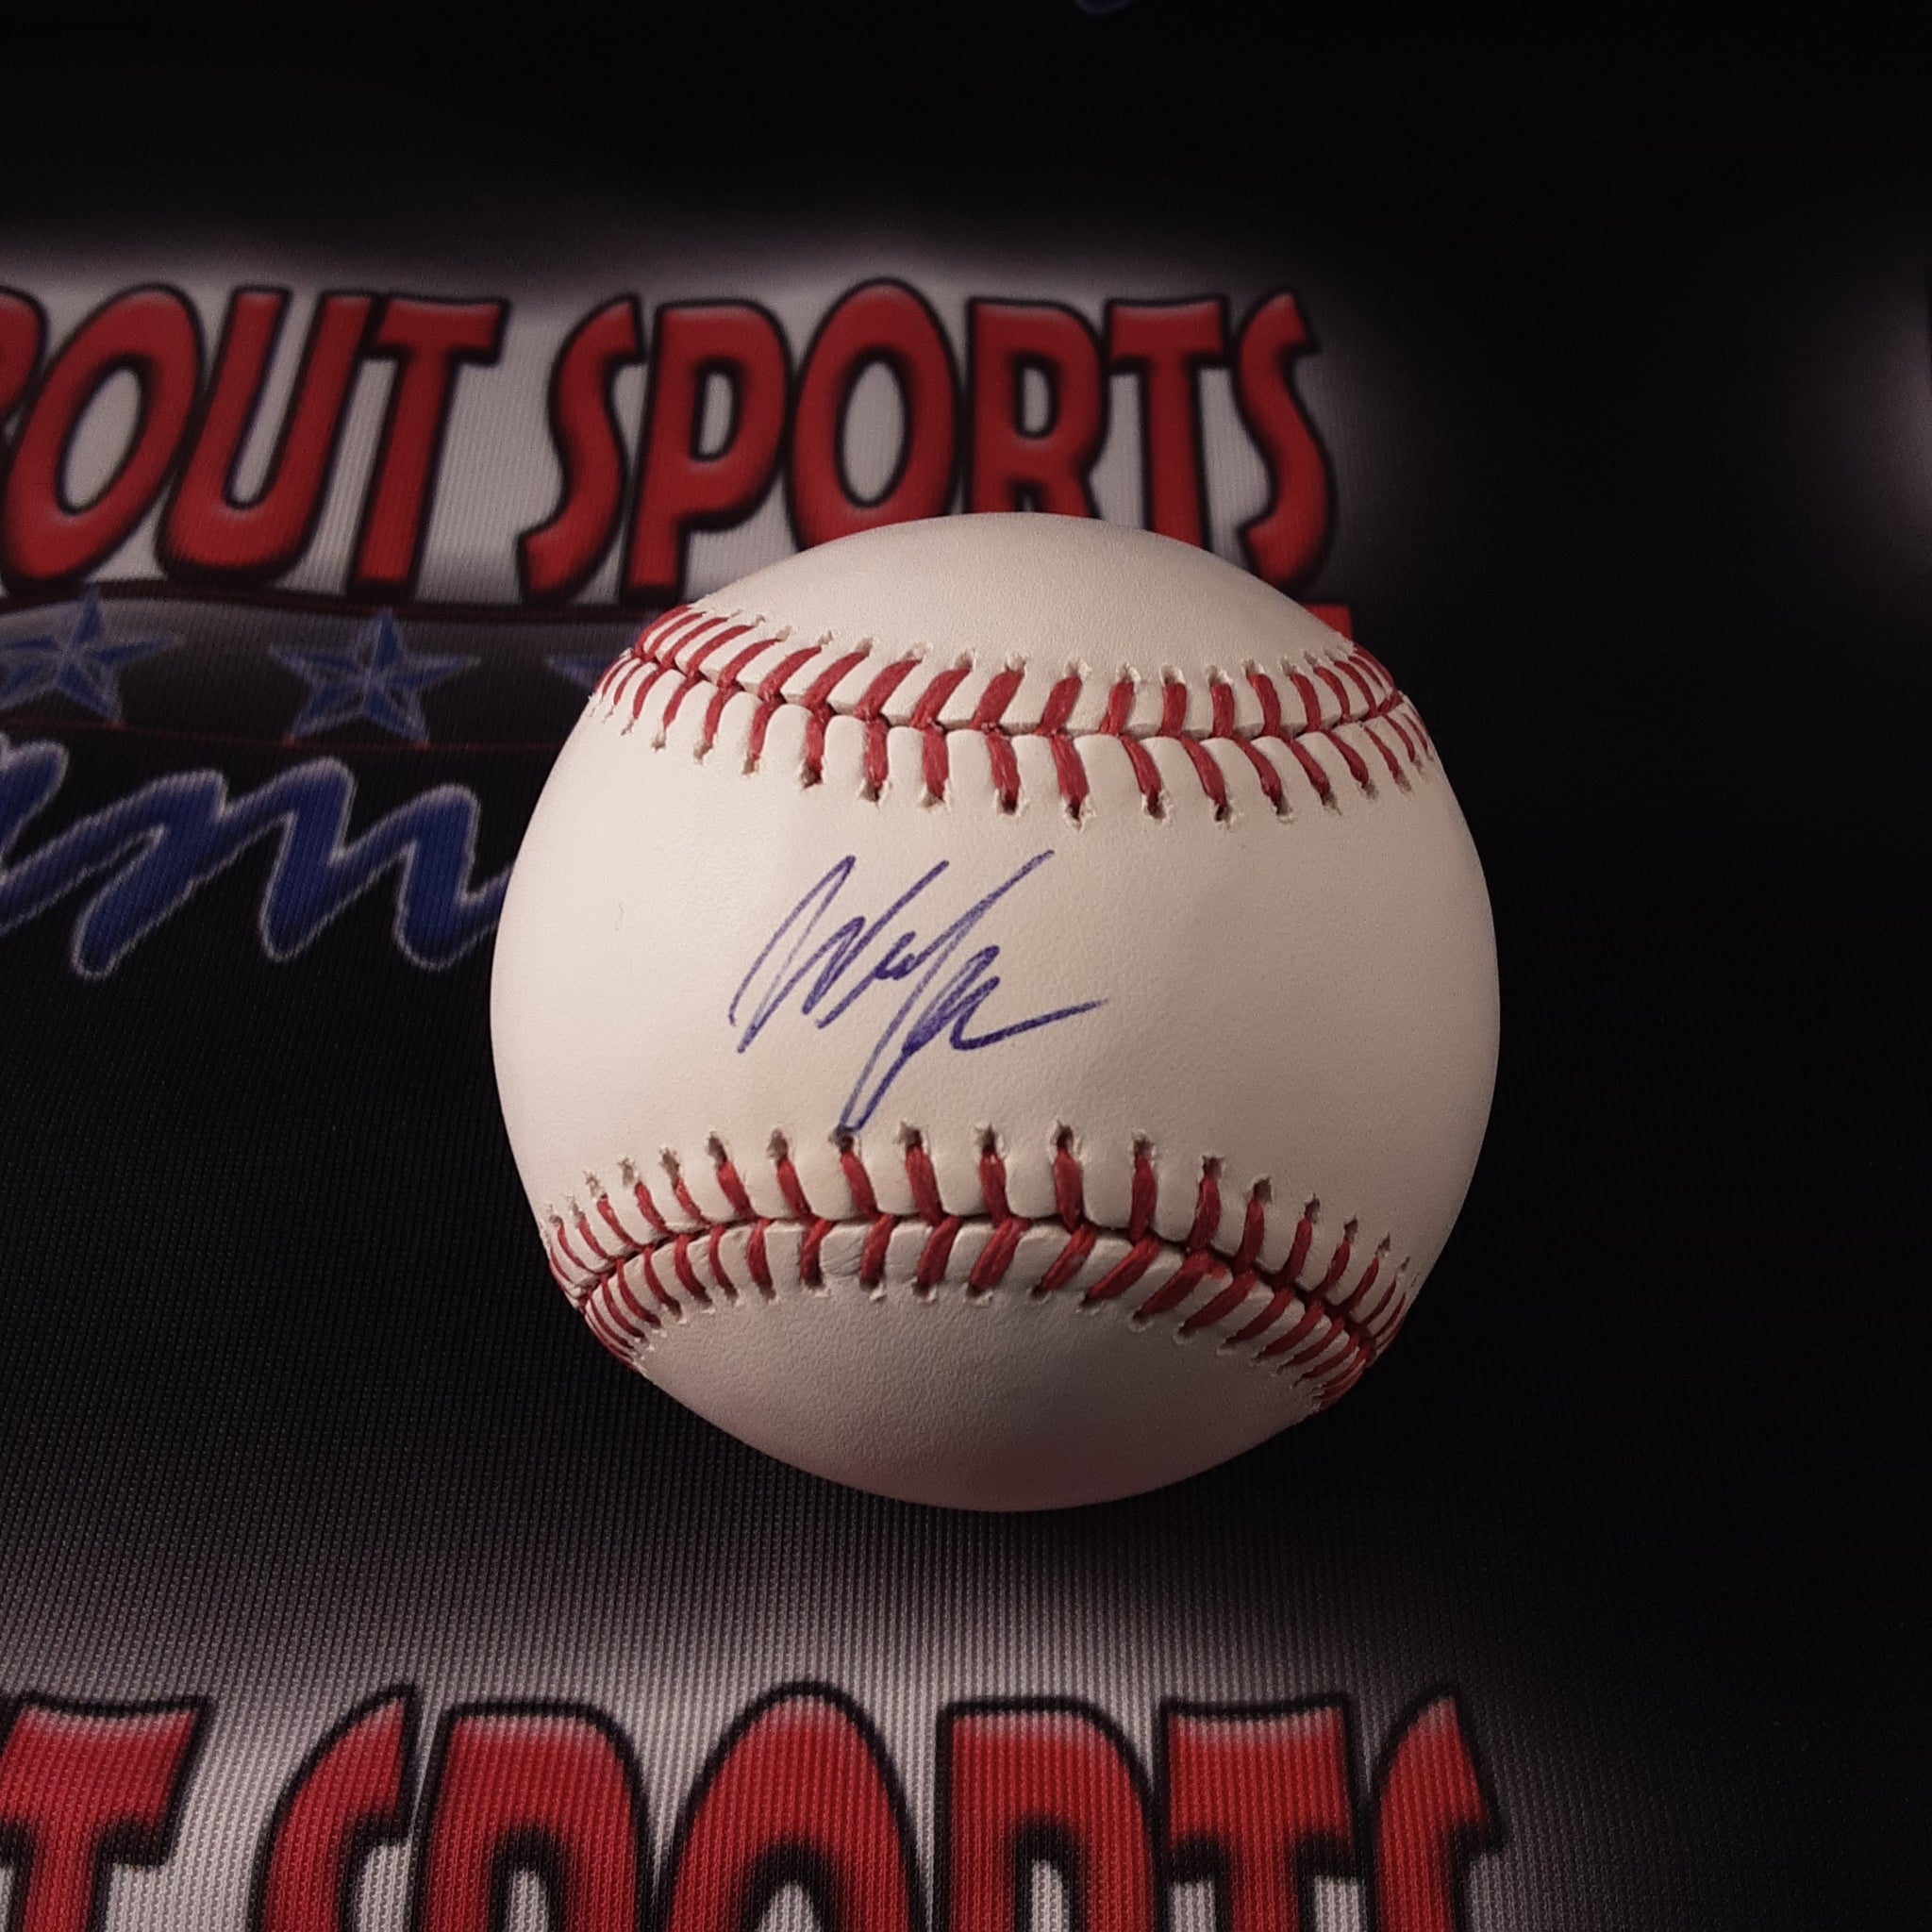 Wil Myers Authentic Signed Baseball Autographed MLB Authenticated.